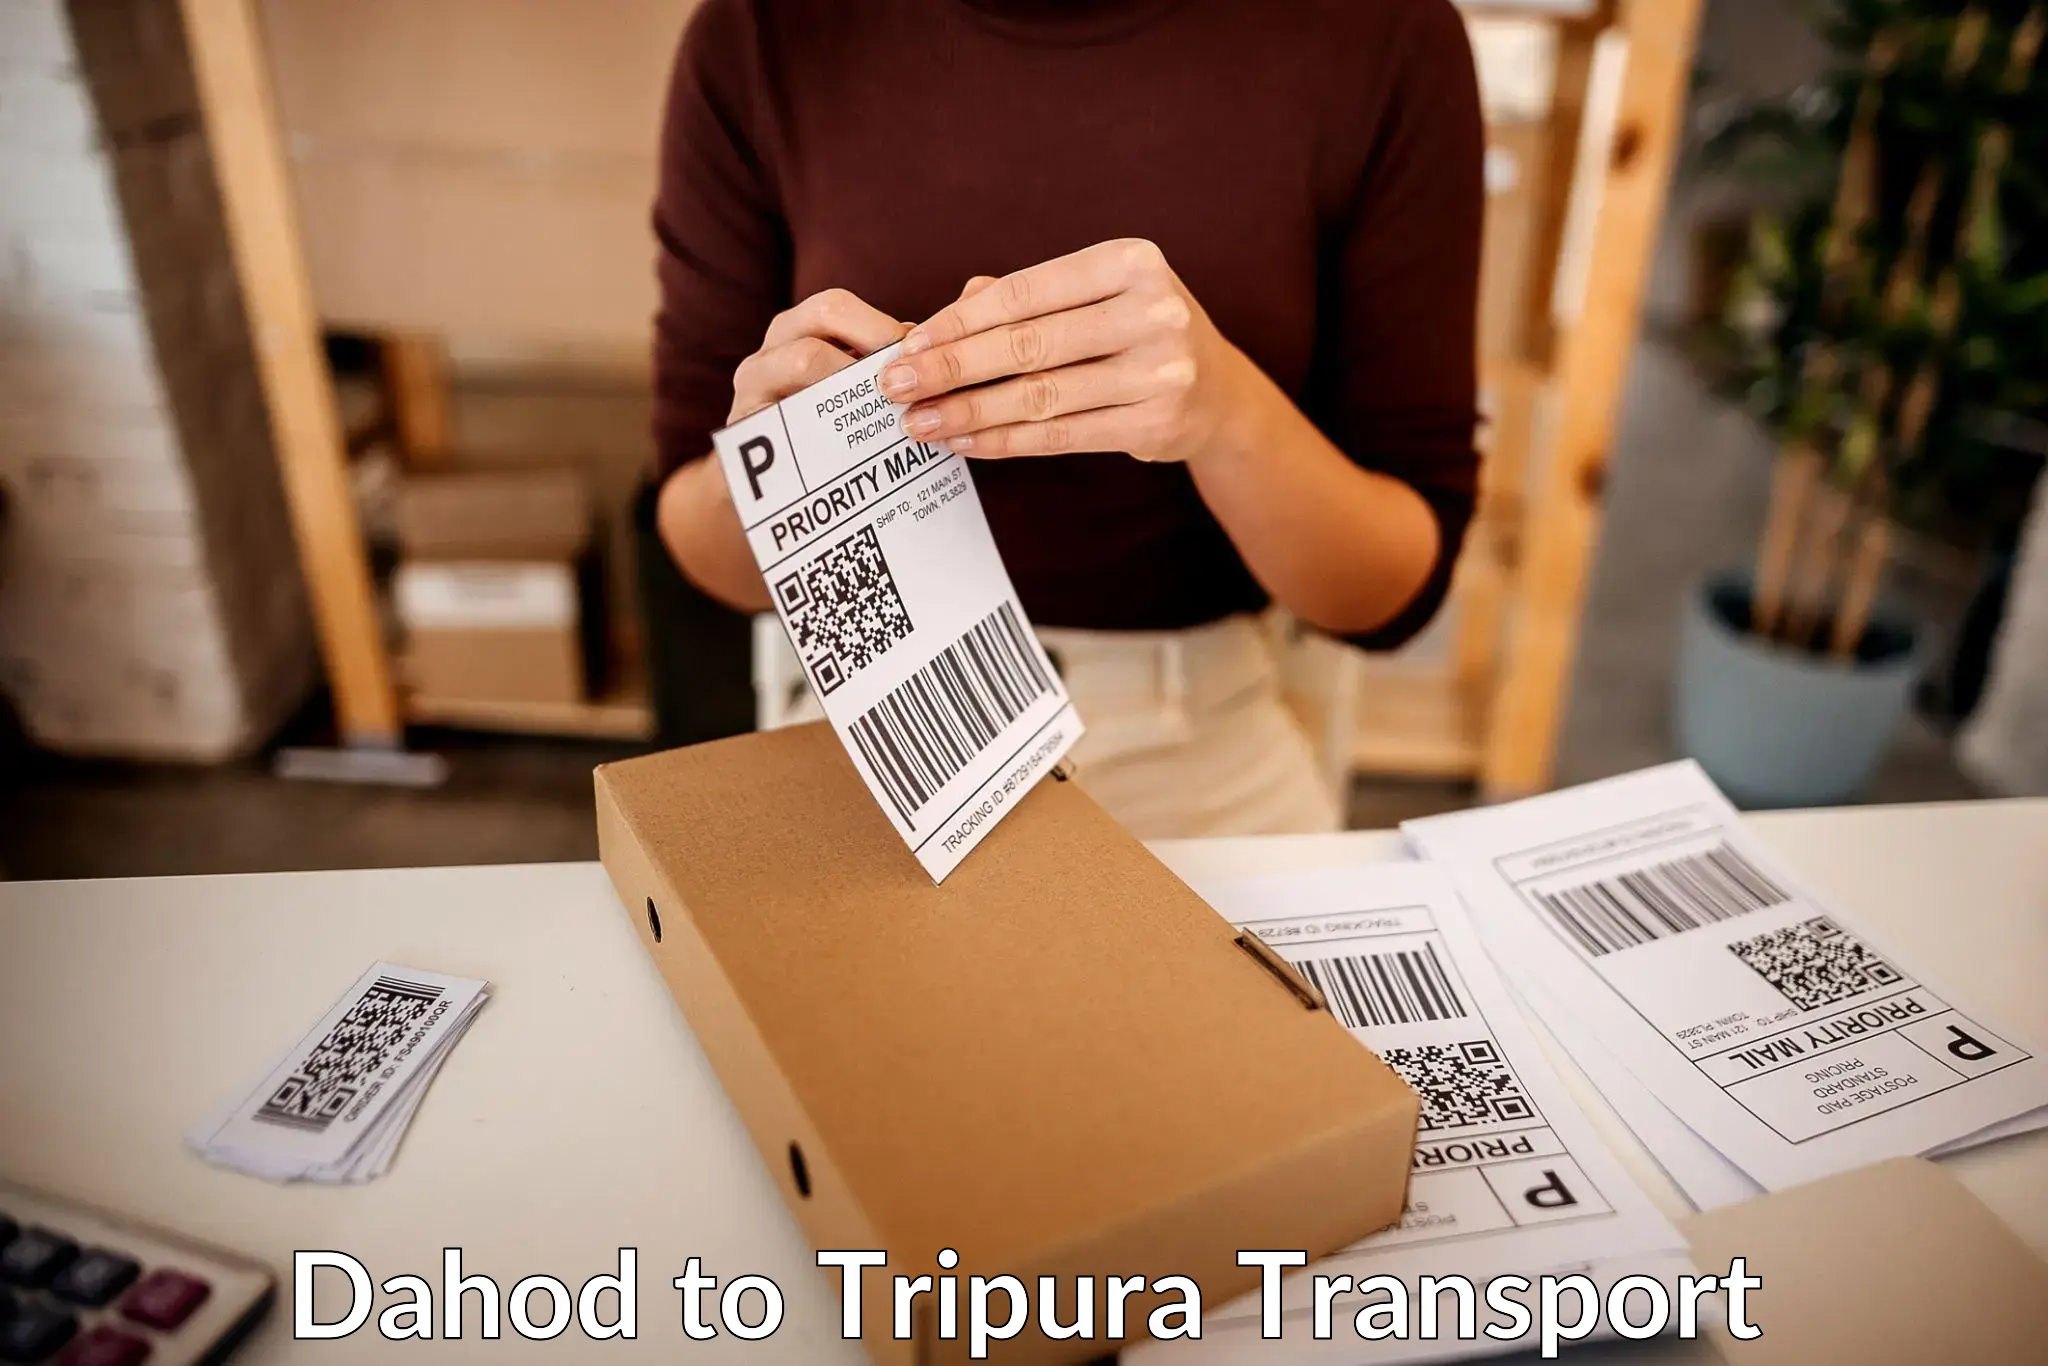 Nationwide transport services Dahod to Udaipur Tripura